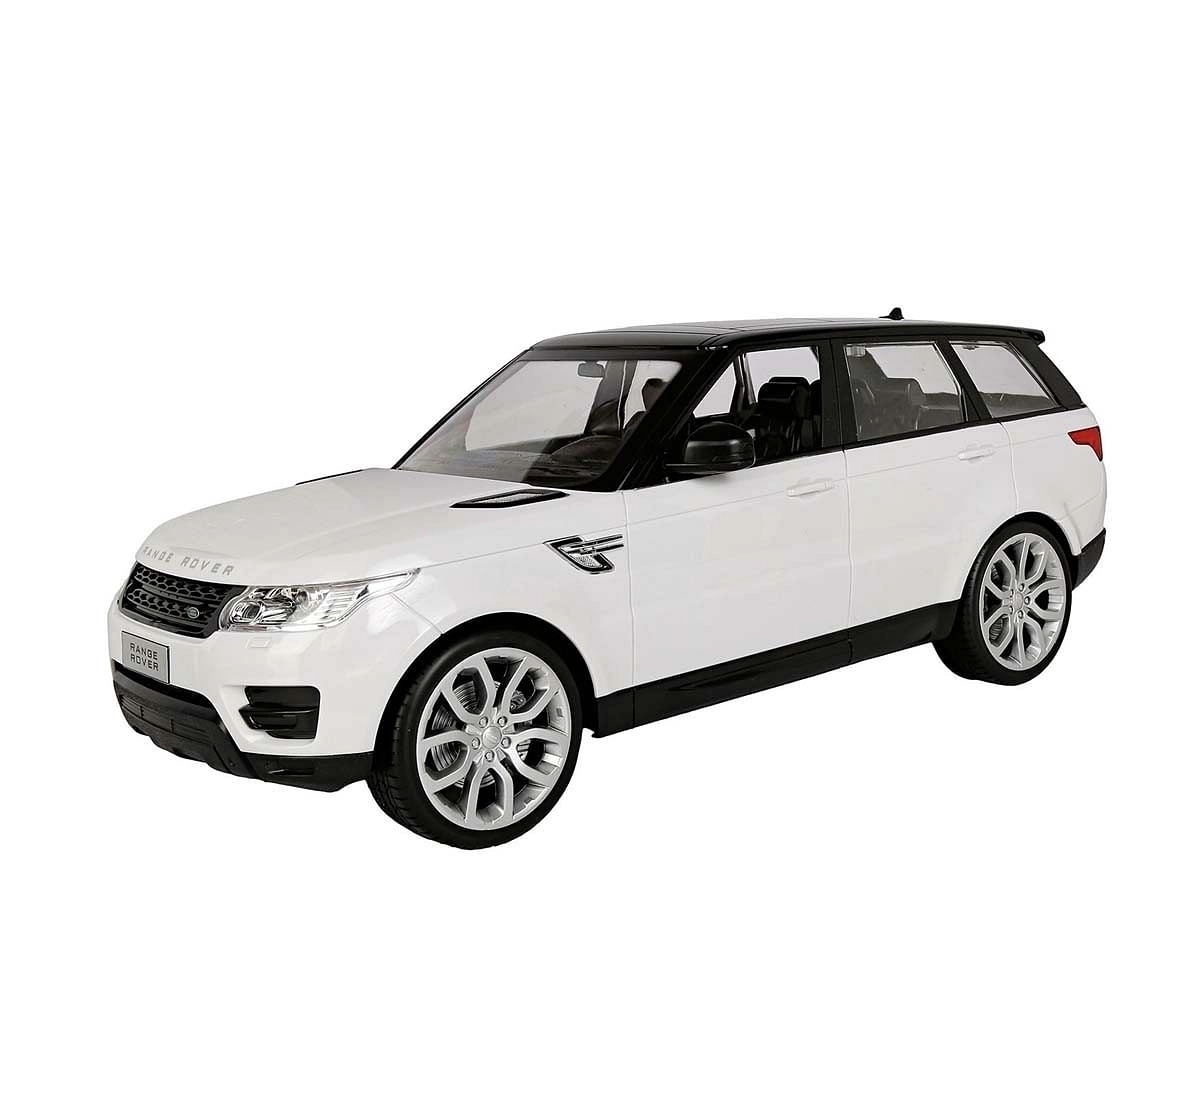 Rowan 1:10 Landrover Sports Car with Remote Control (White / Red) Toys for Kids age 6Y+ 